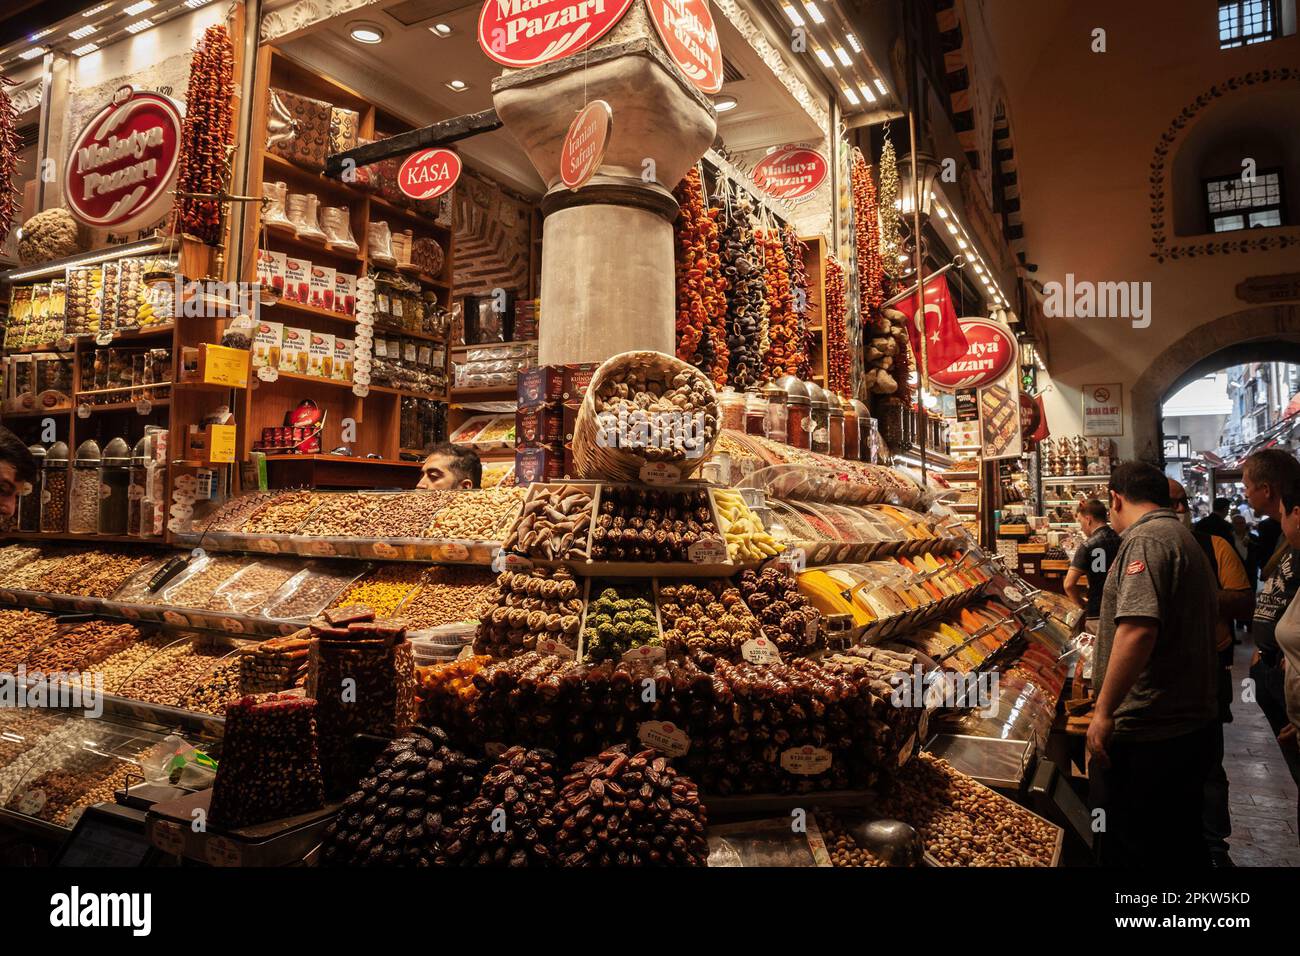 Picture of a stall of a merchant and shop in the egyptian bazaar of Istanbul, Turkey selling spices and other turkish food. The Spice Bazaar in Istanb Stock Photo